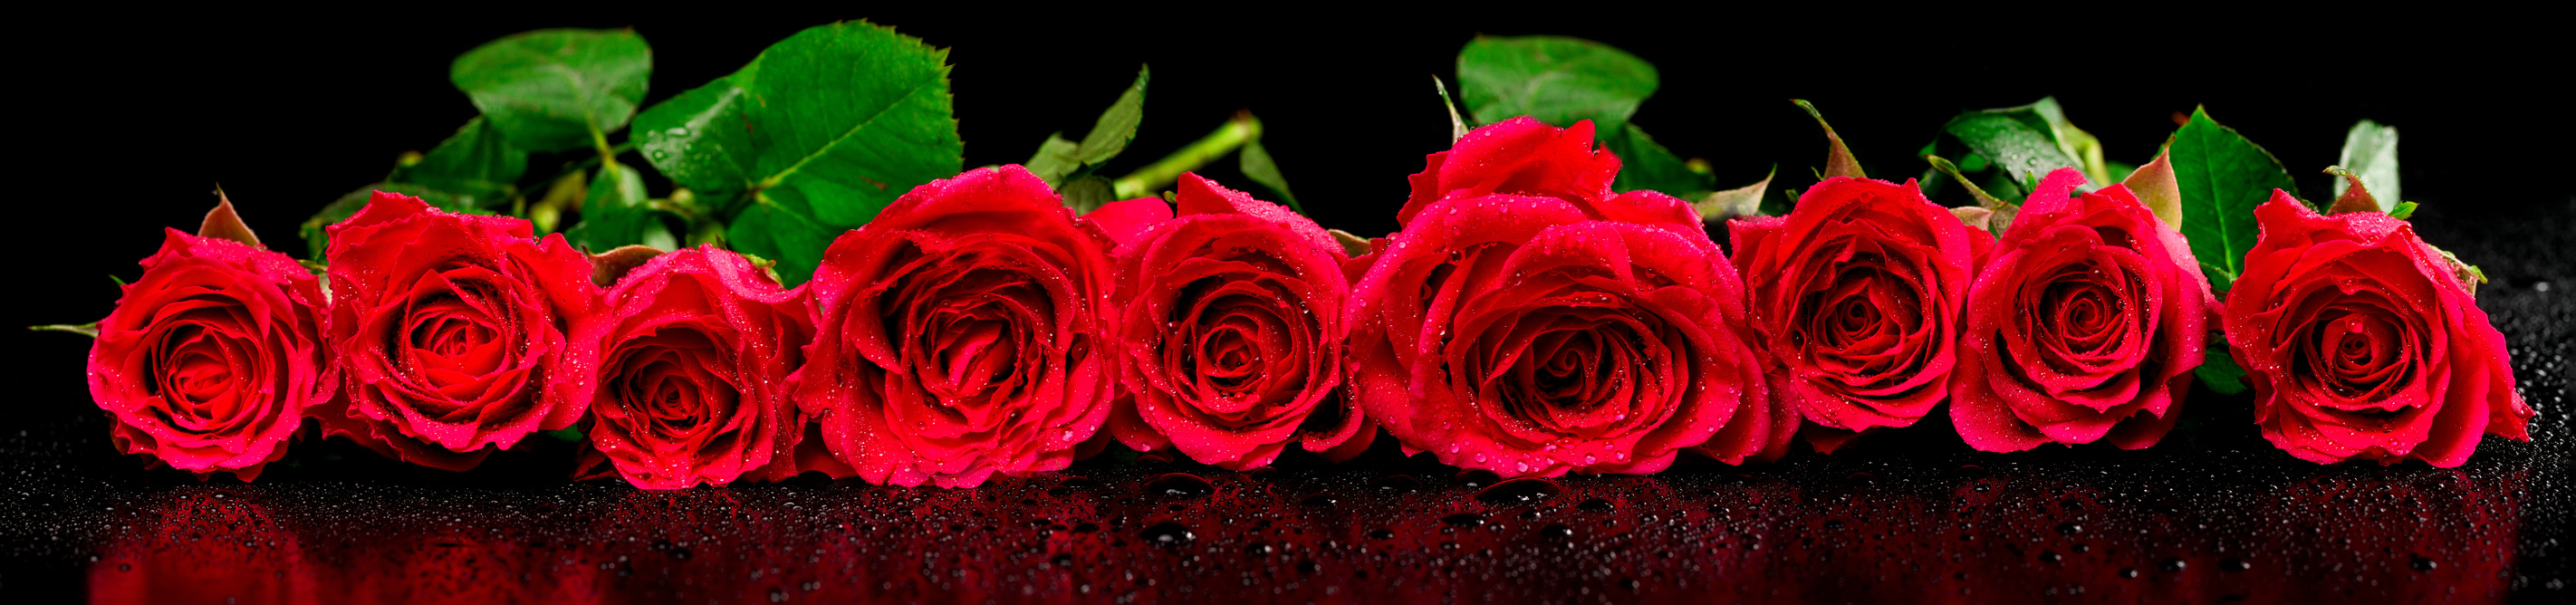 Panoramic image of red roses with dew drops on a black background